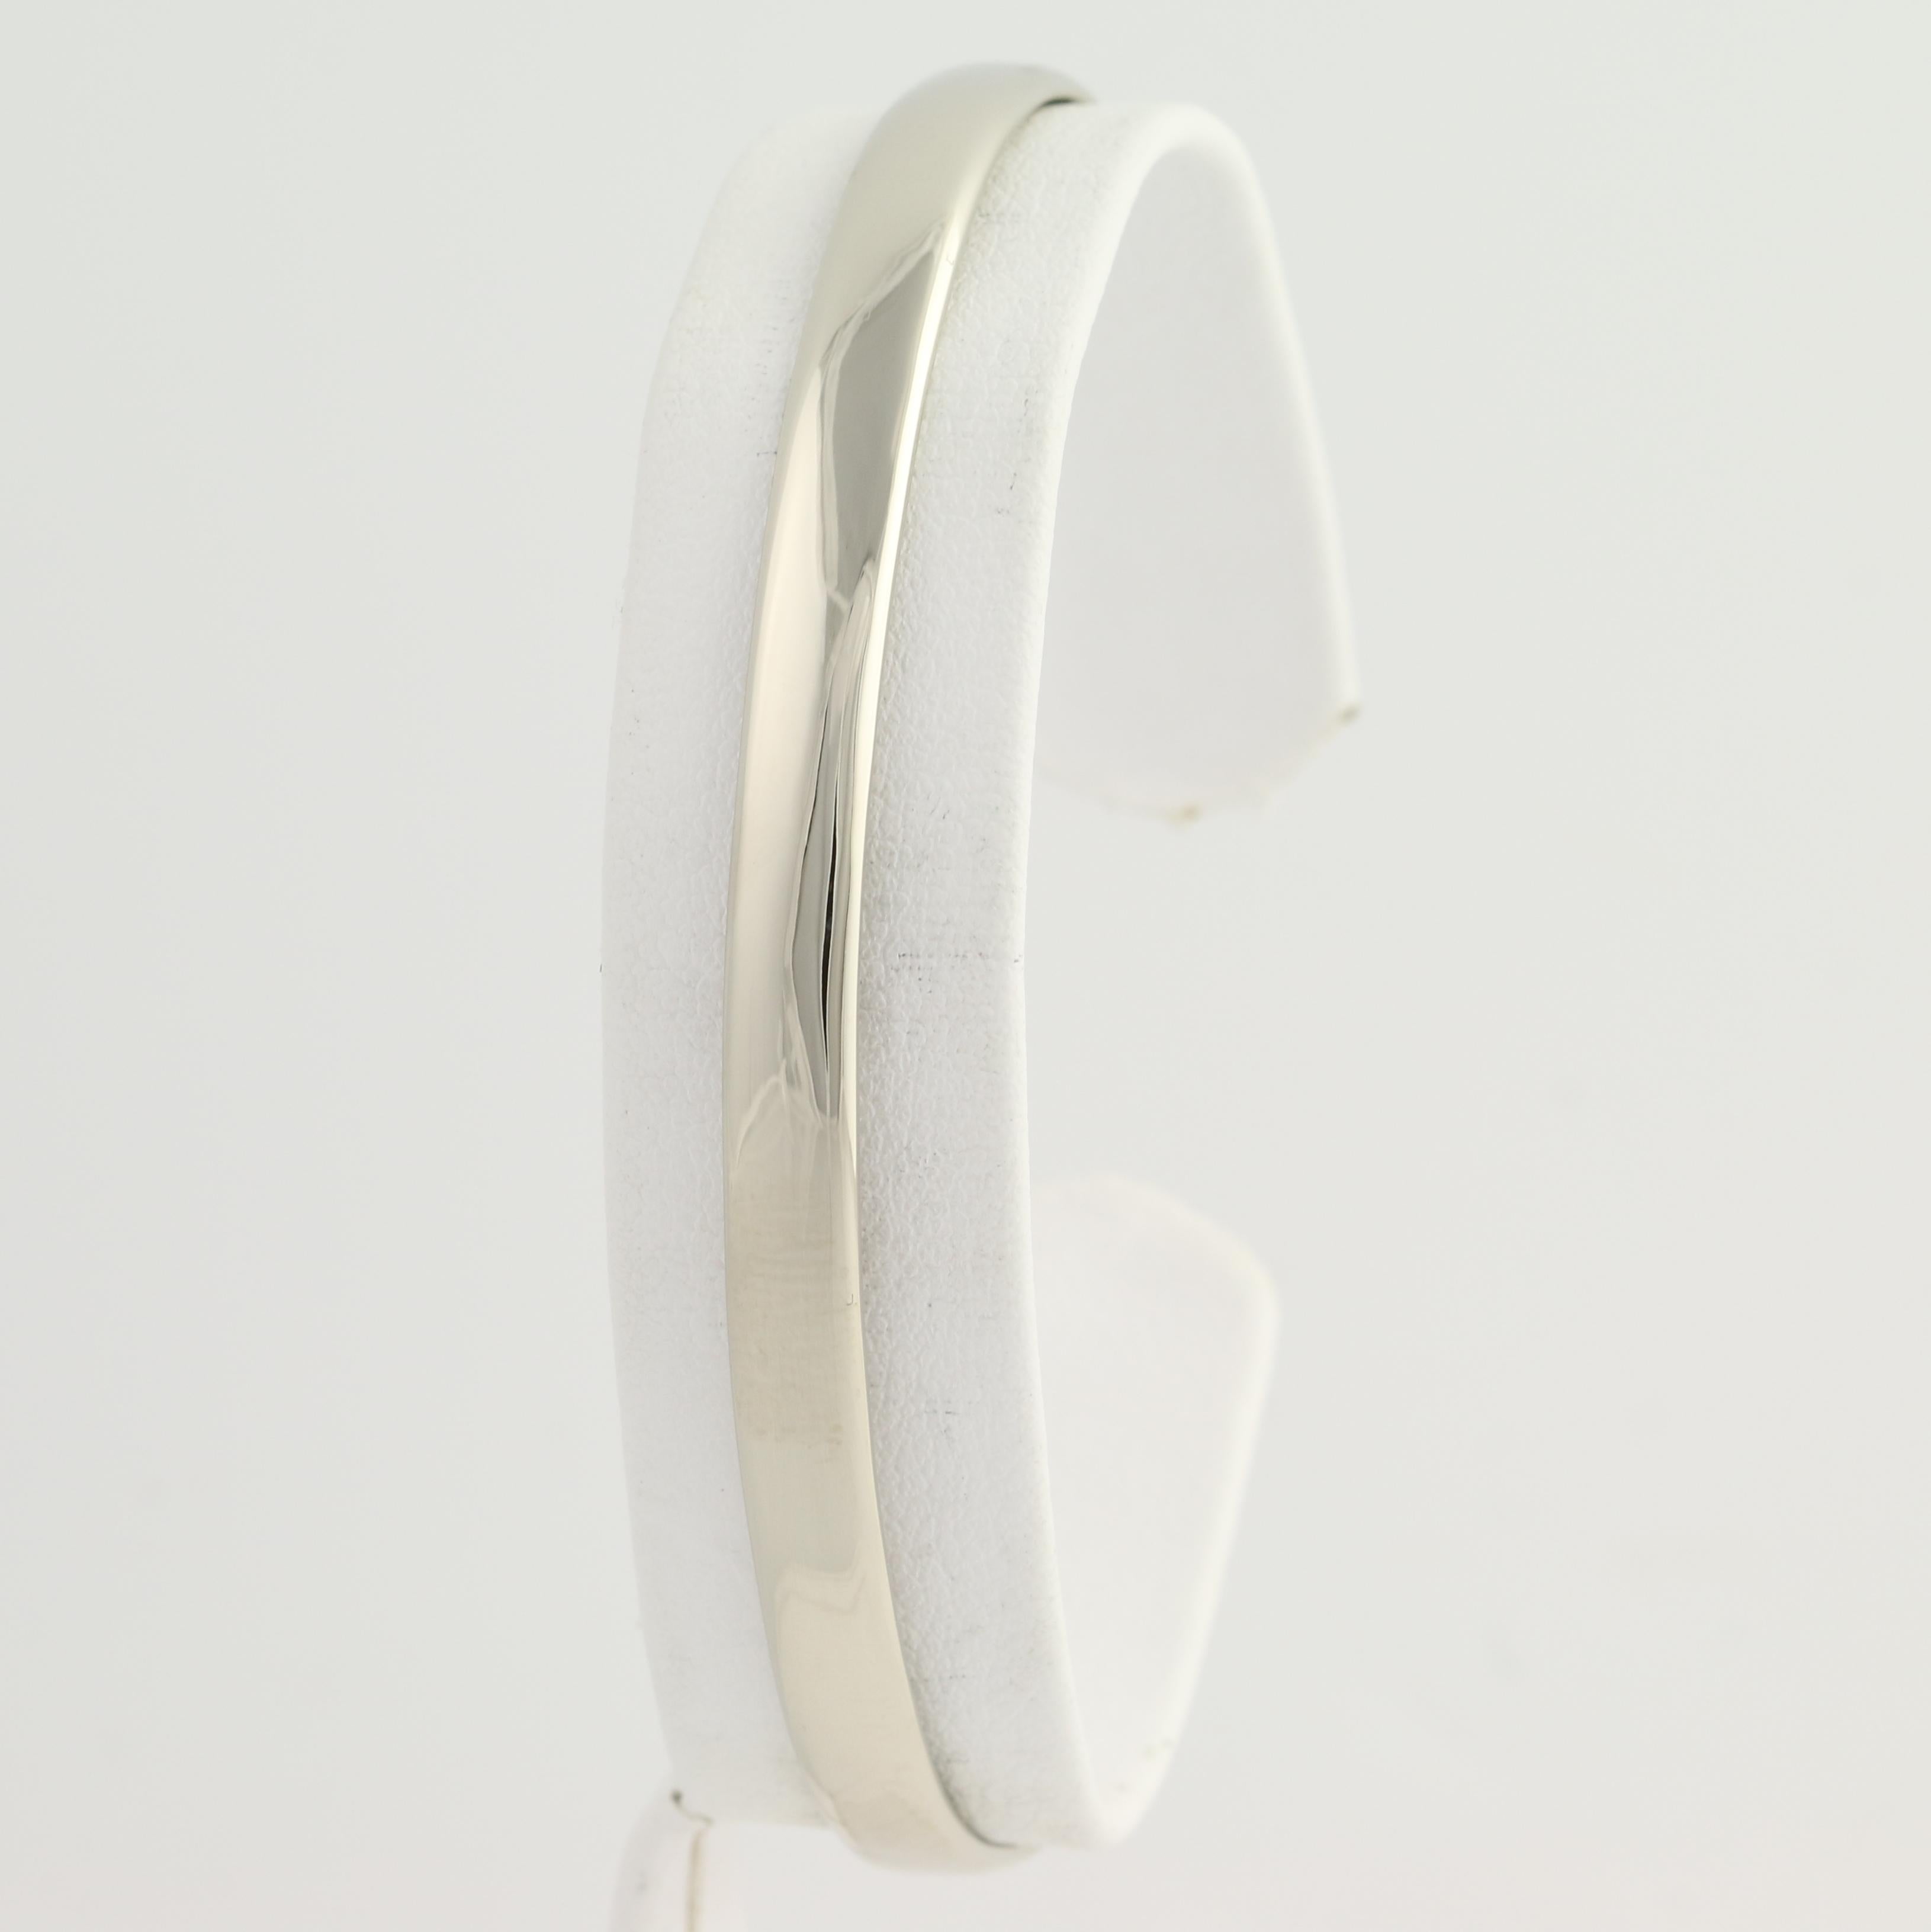 Treat yourself or a special friend to a chic, go-with-anything cuff bracelet! This brand-new piece is handmade from 14k white gold and the face is smoothly polished so that the cuff draws and reflects light with any movement. Solid in construction